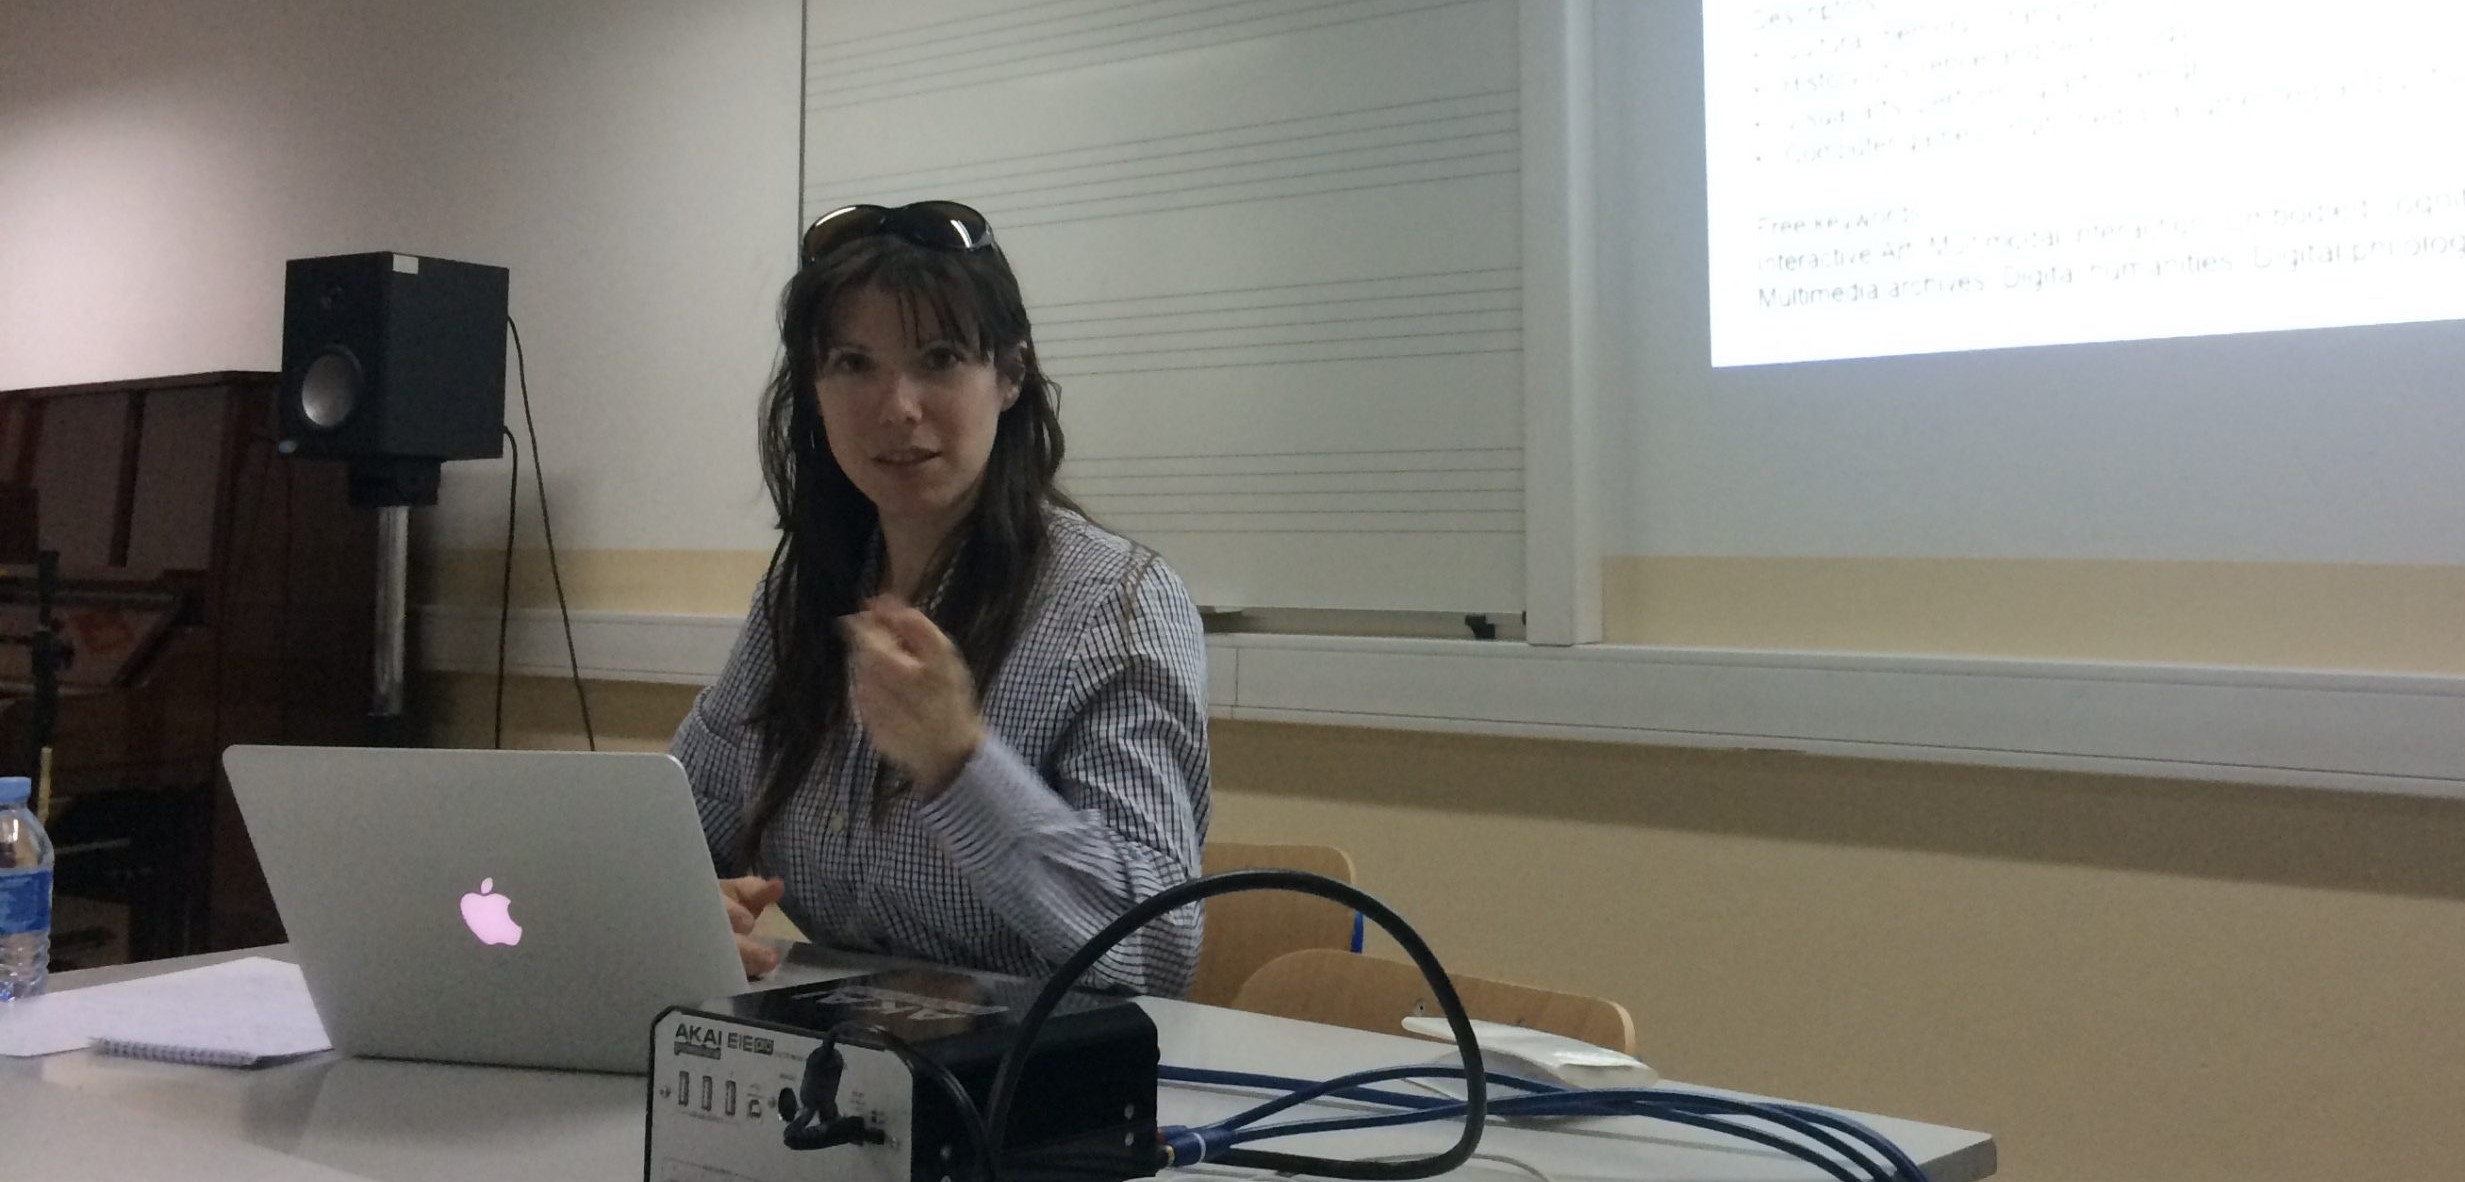 Federica Bressan: Preservation, recovery and digital archiving of historical sound recordings